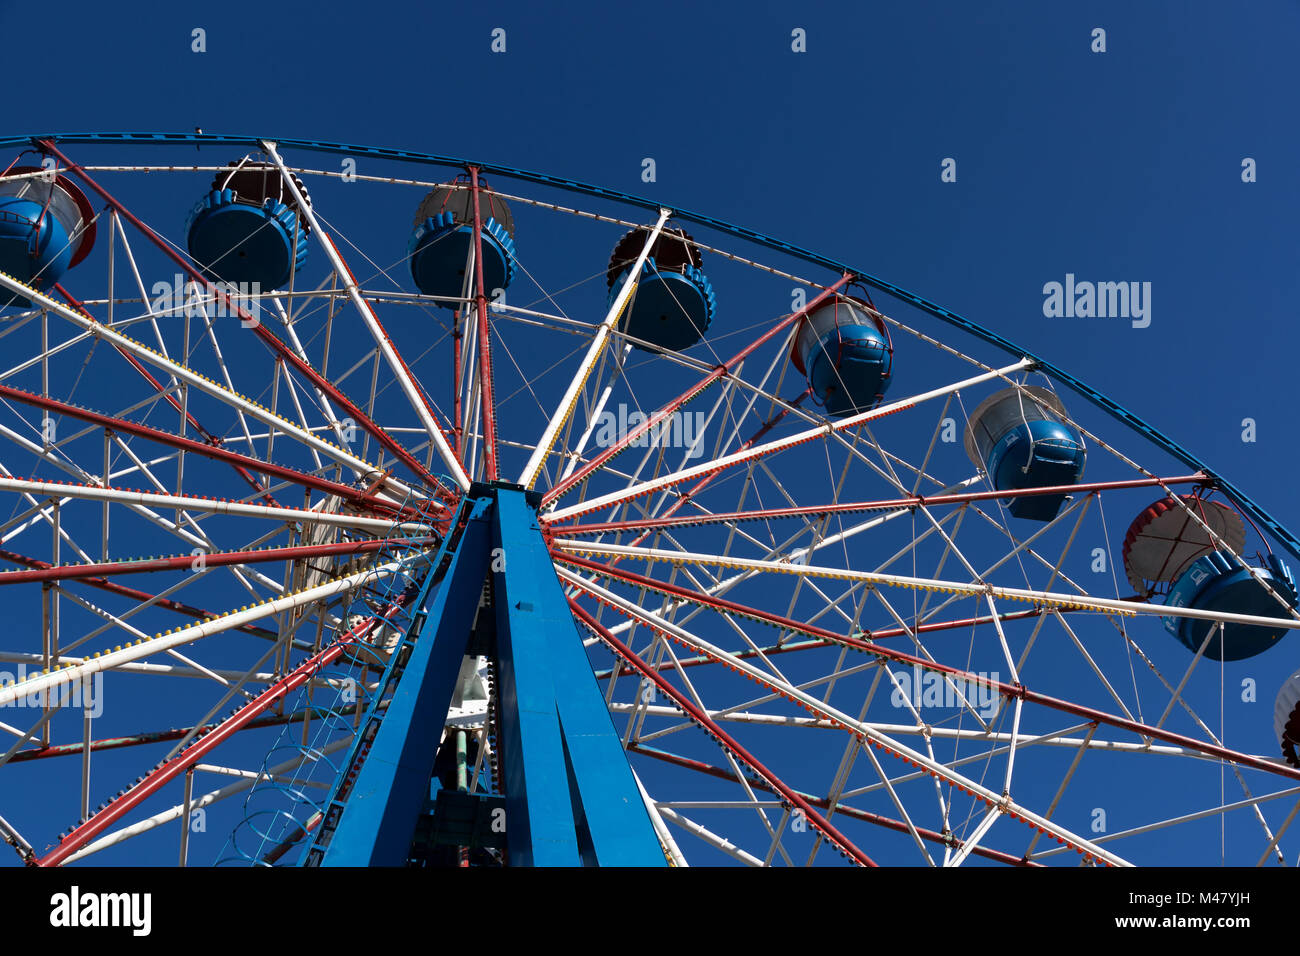 Ferris wheel waiting to entertain guests of the park Stock Photo